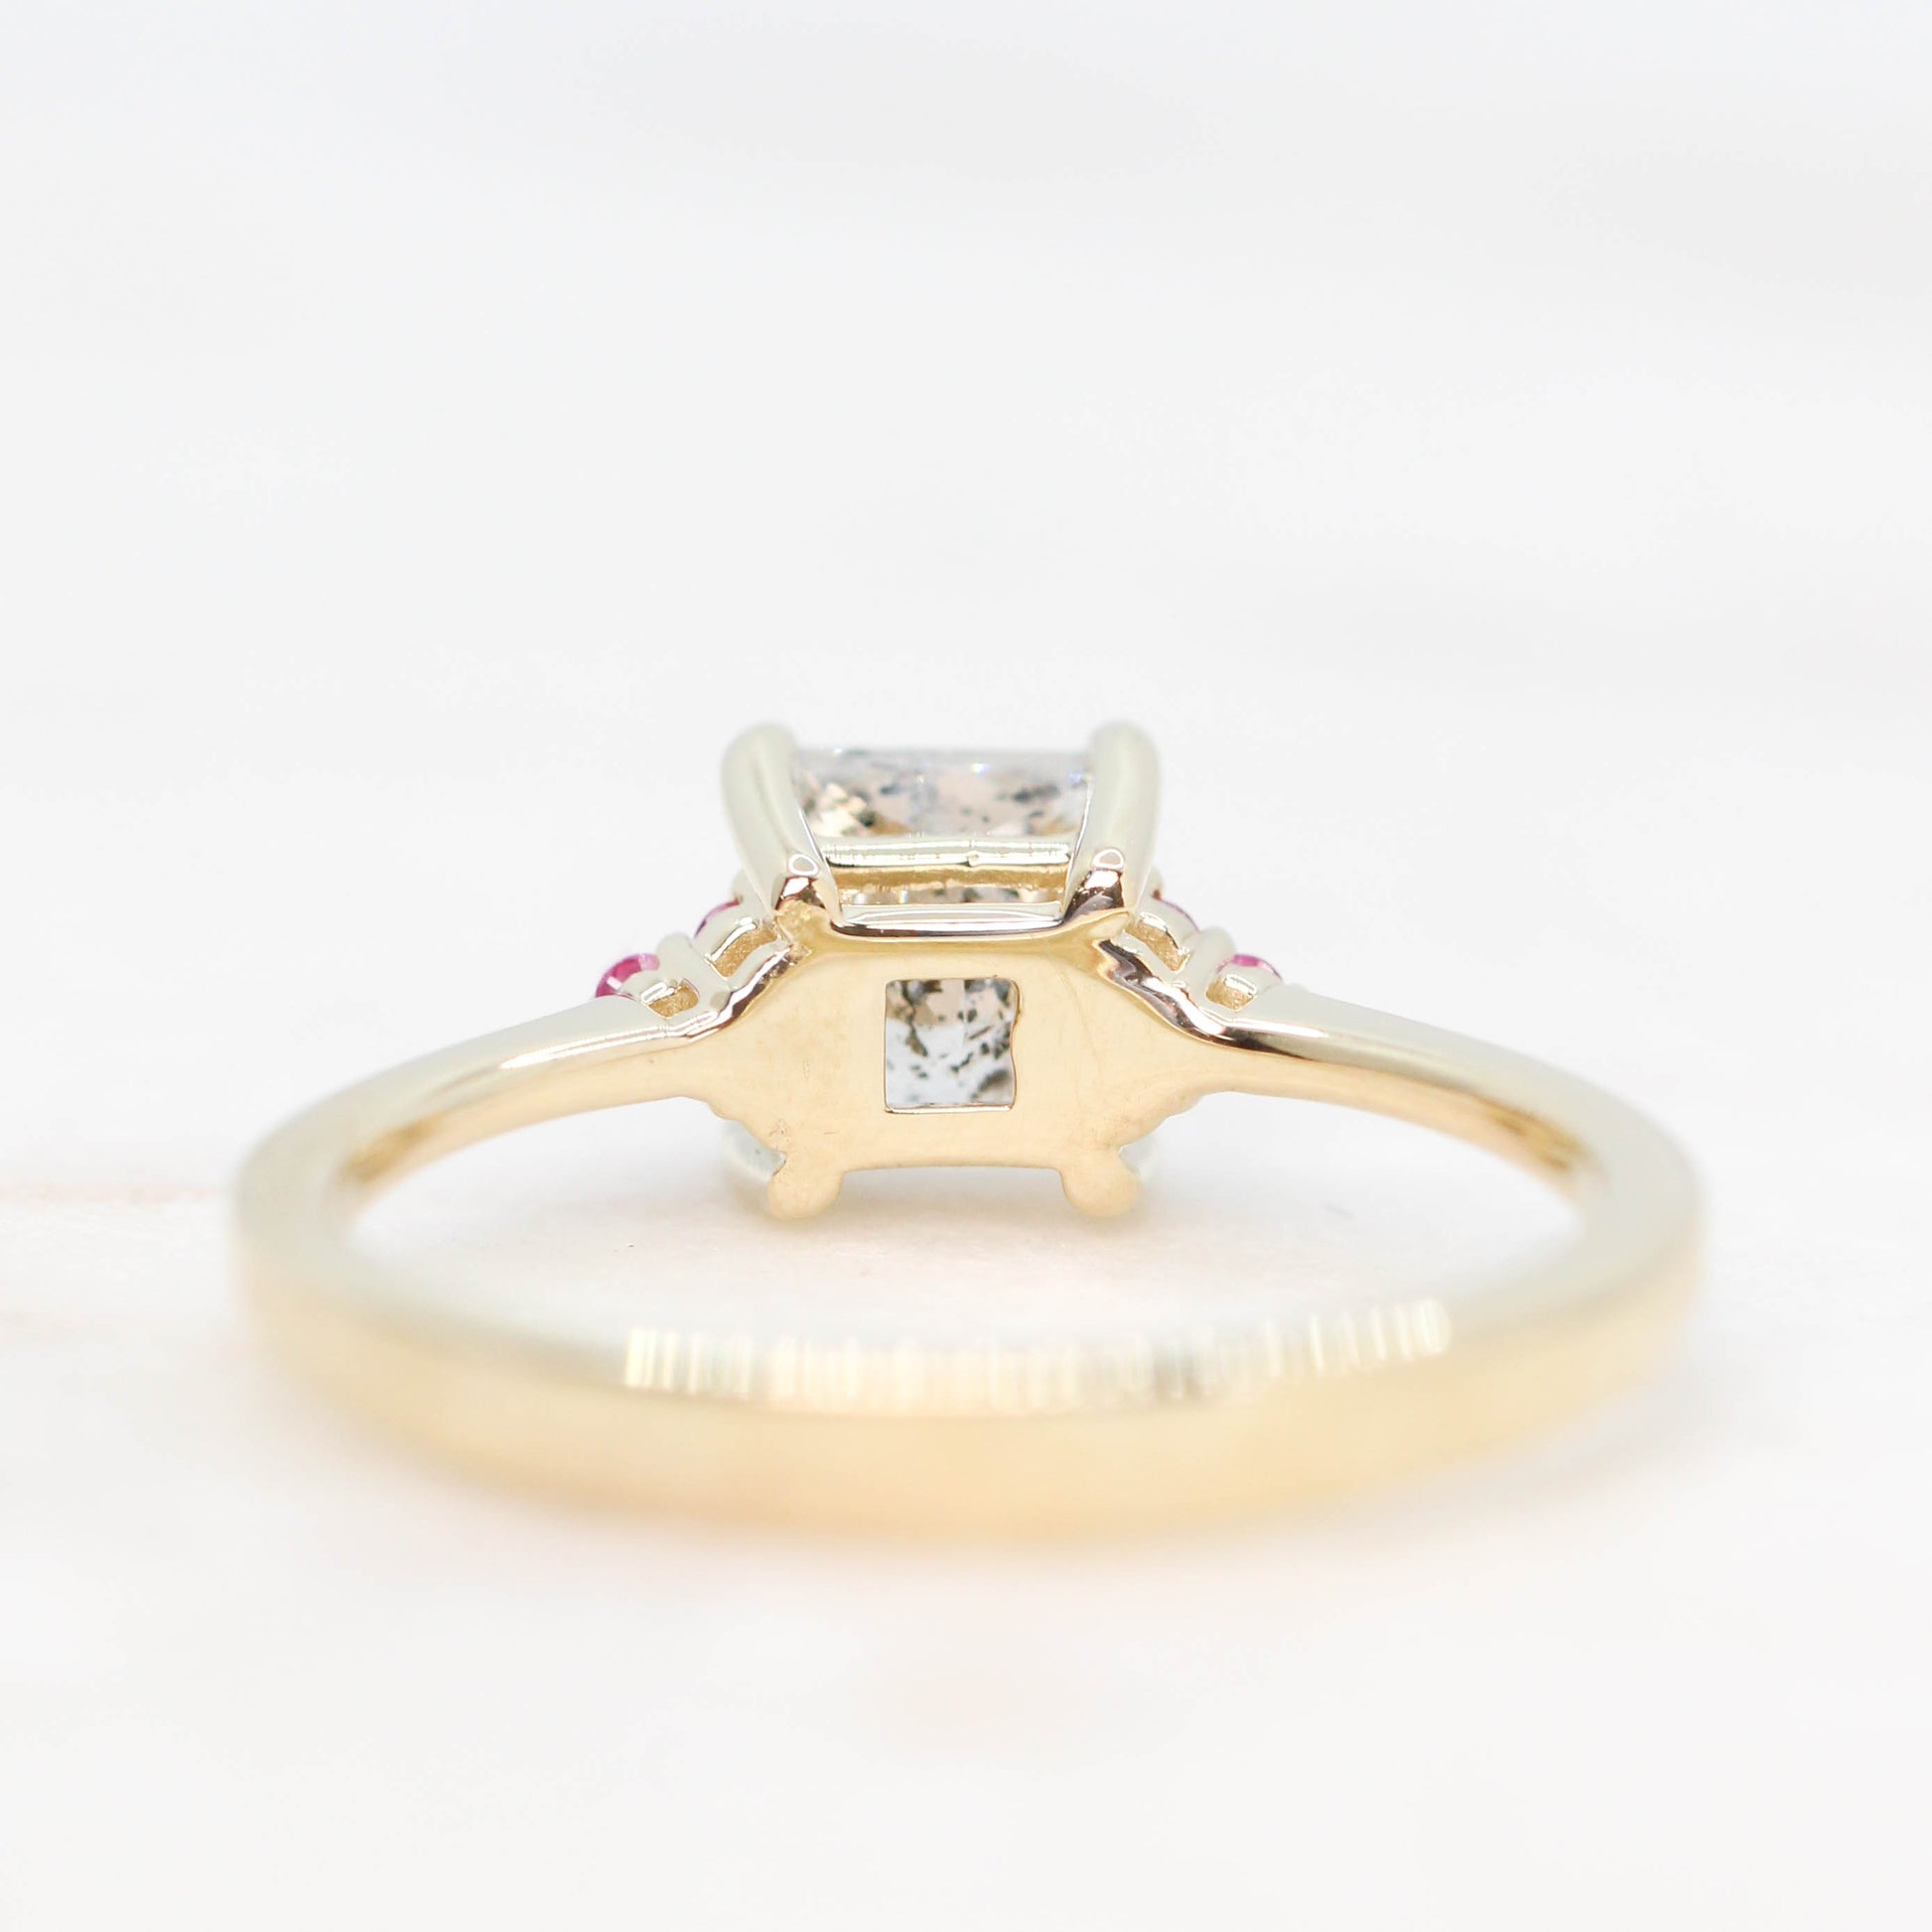 Imogene Ring with a 1.25 Carat Clear Celestial Princess Cut Diamond and Pink Accent Sapphires in 14k Yellow Gold - Ready to Size and Ship - Midwinter Co. Alternative Bridal Rings and Modern Fine Jewelry